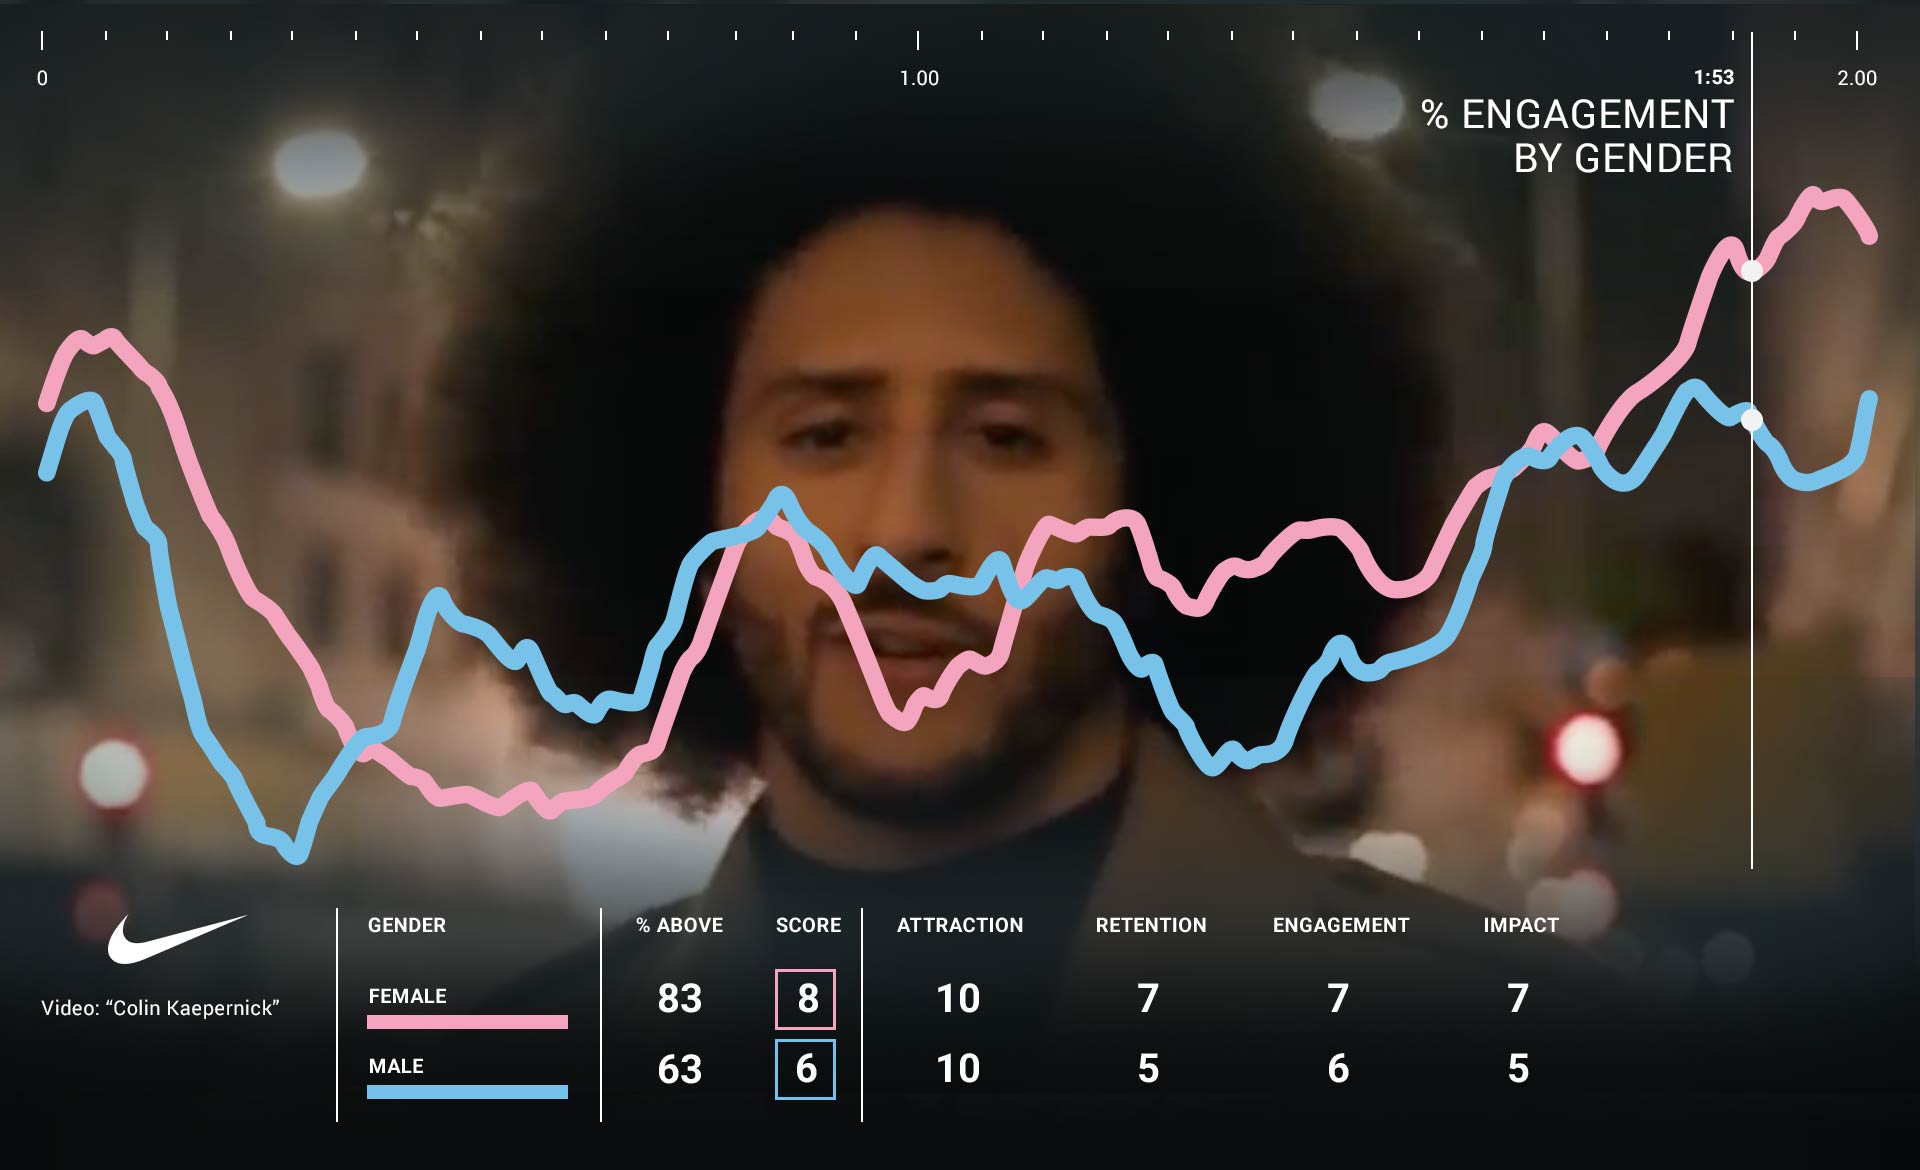 5 AI-Powered Insights About Nike’s Kaepernick Ad That’ll Surprise You